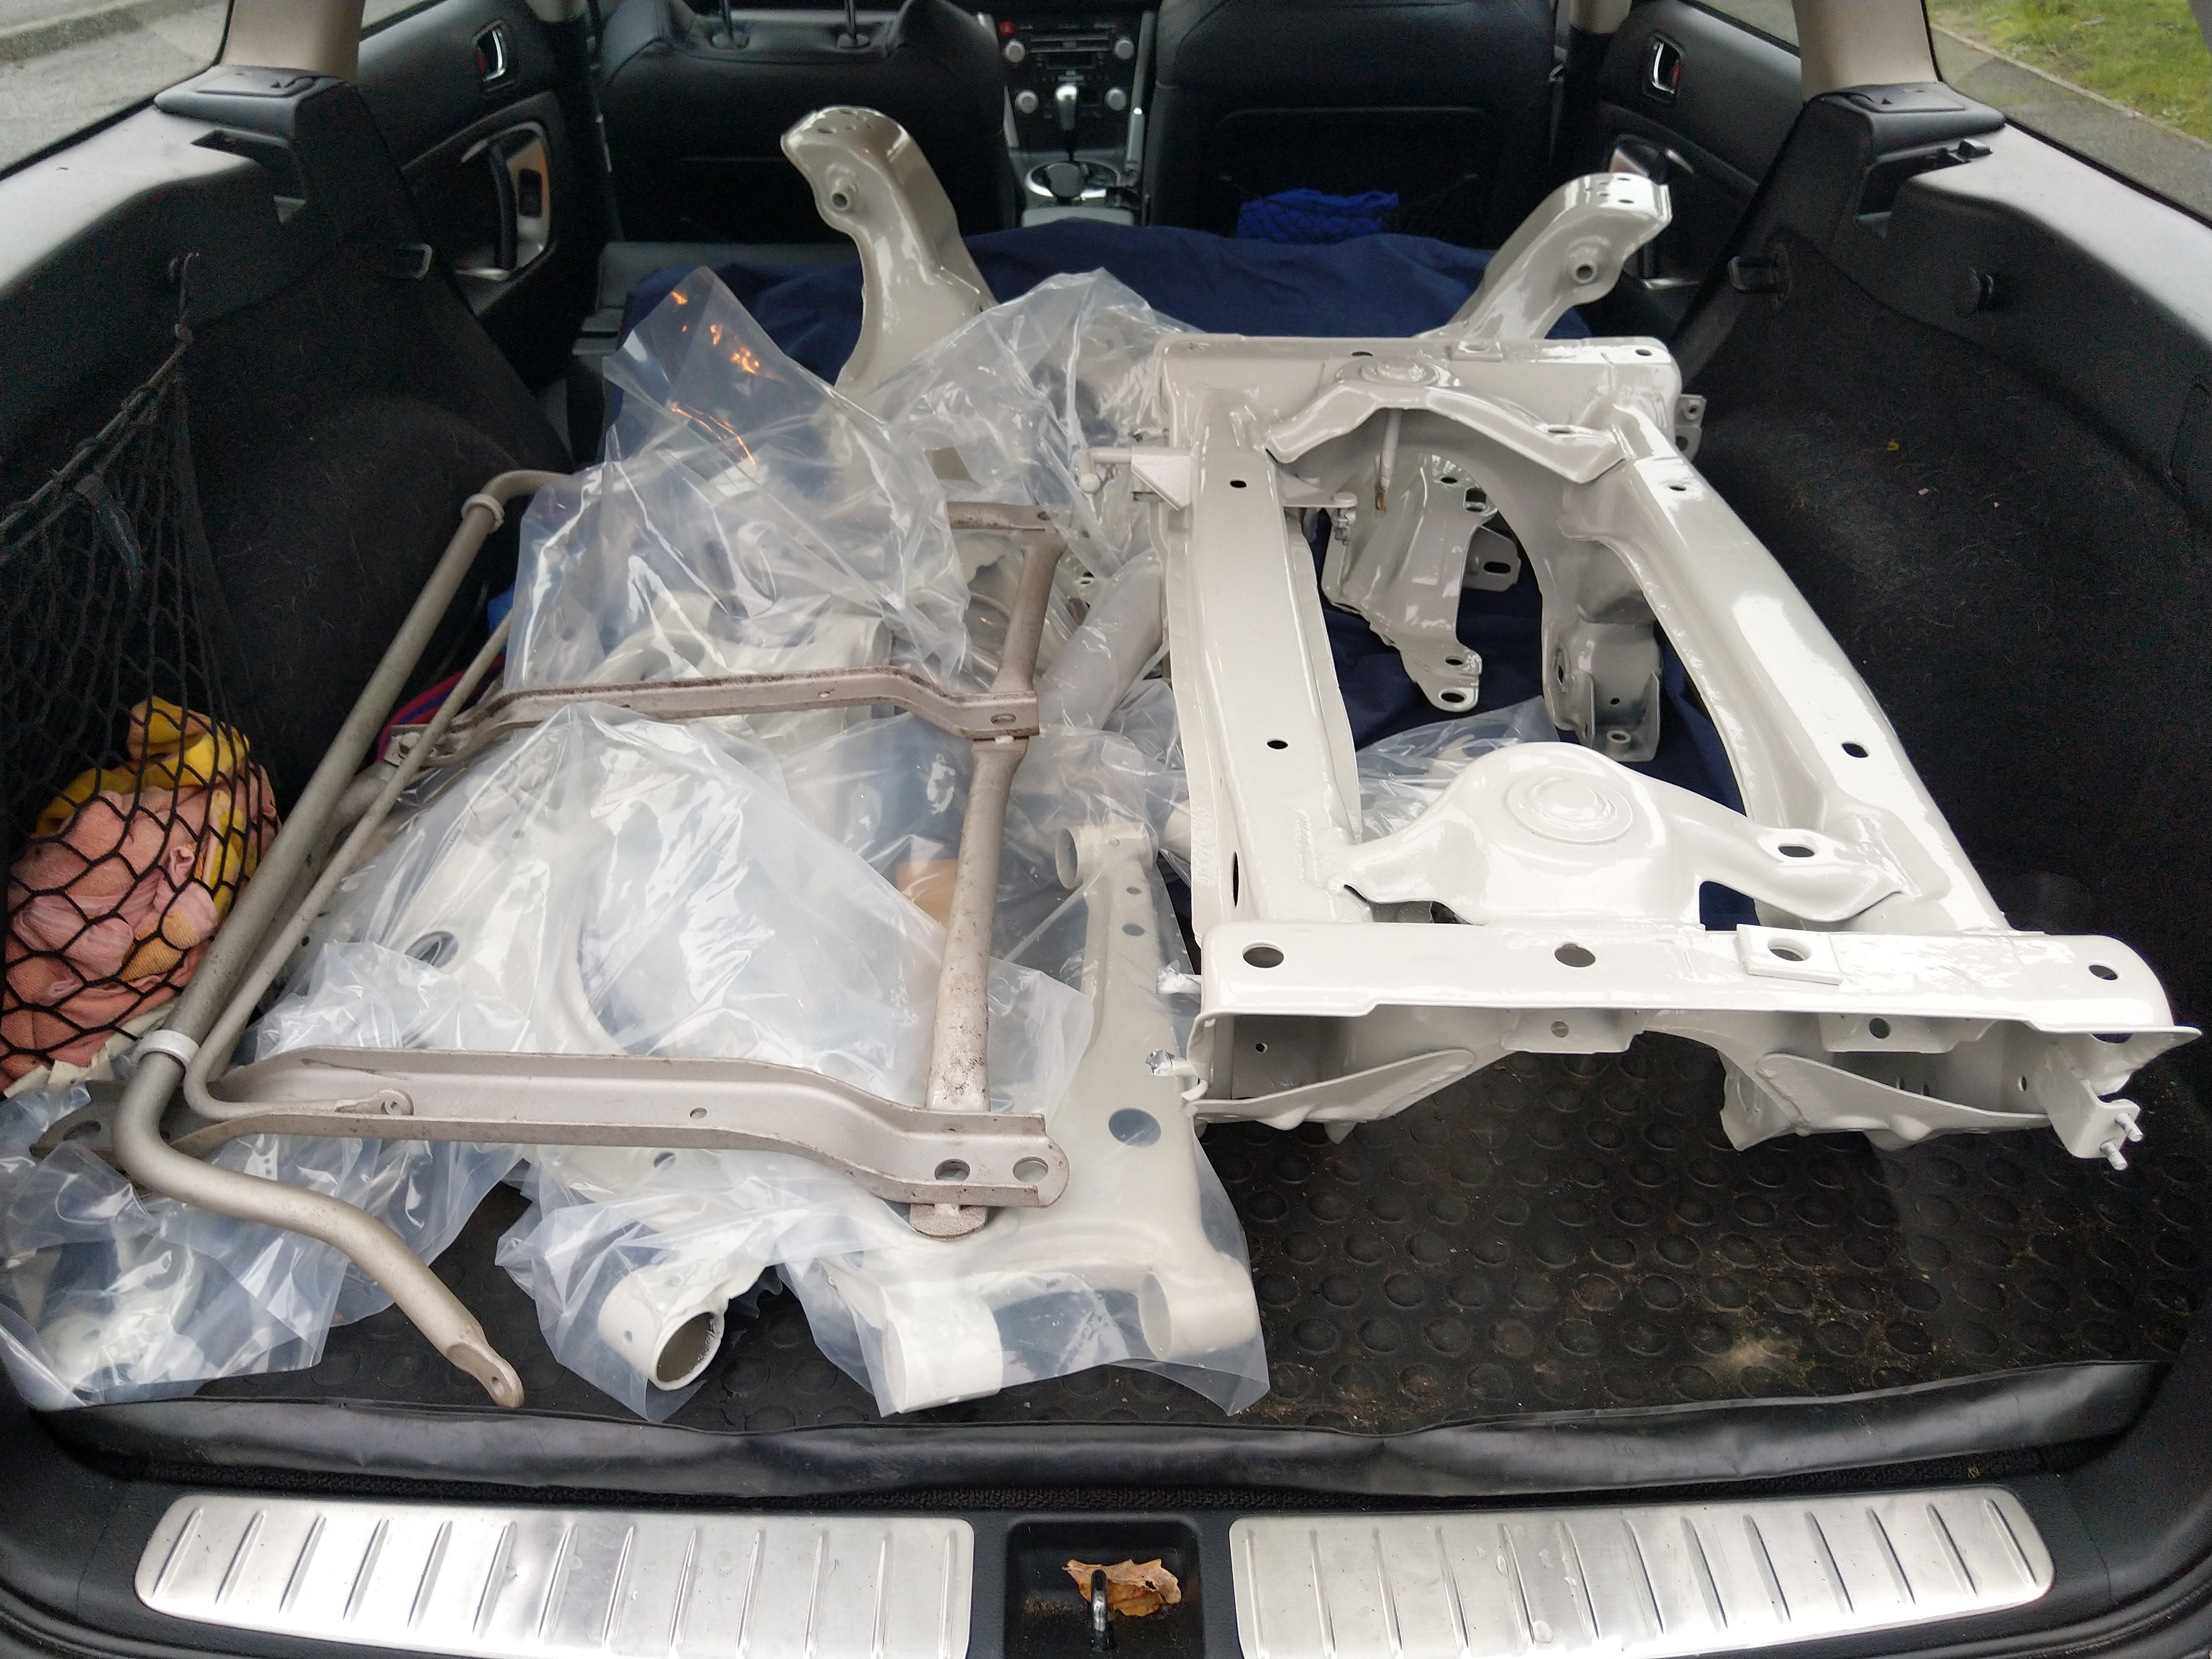 Just collected the subframes from the powder coaters. 